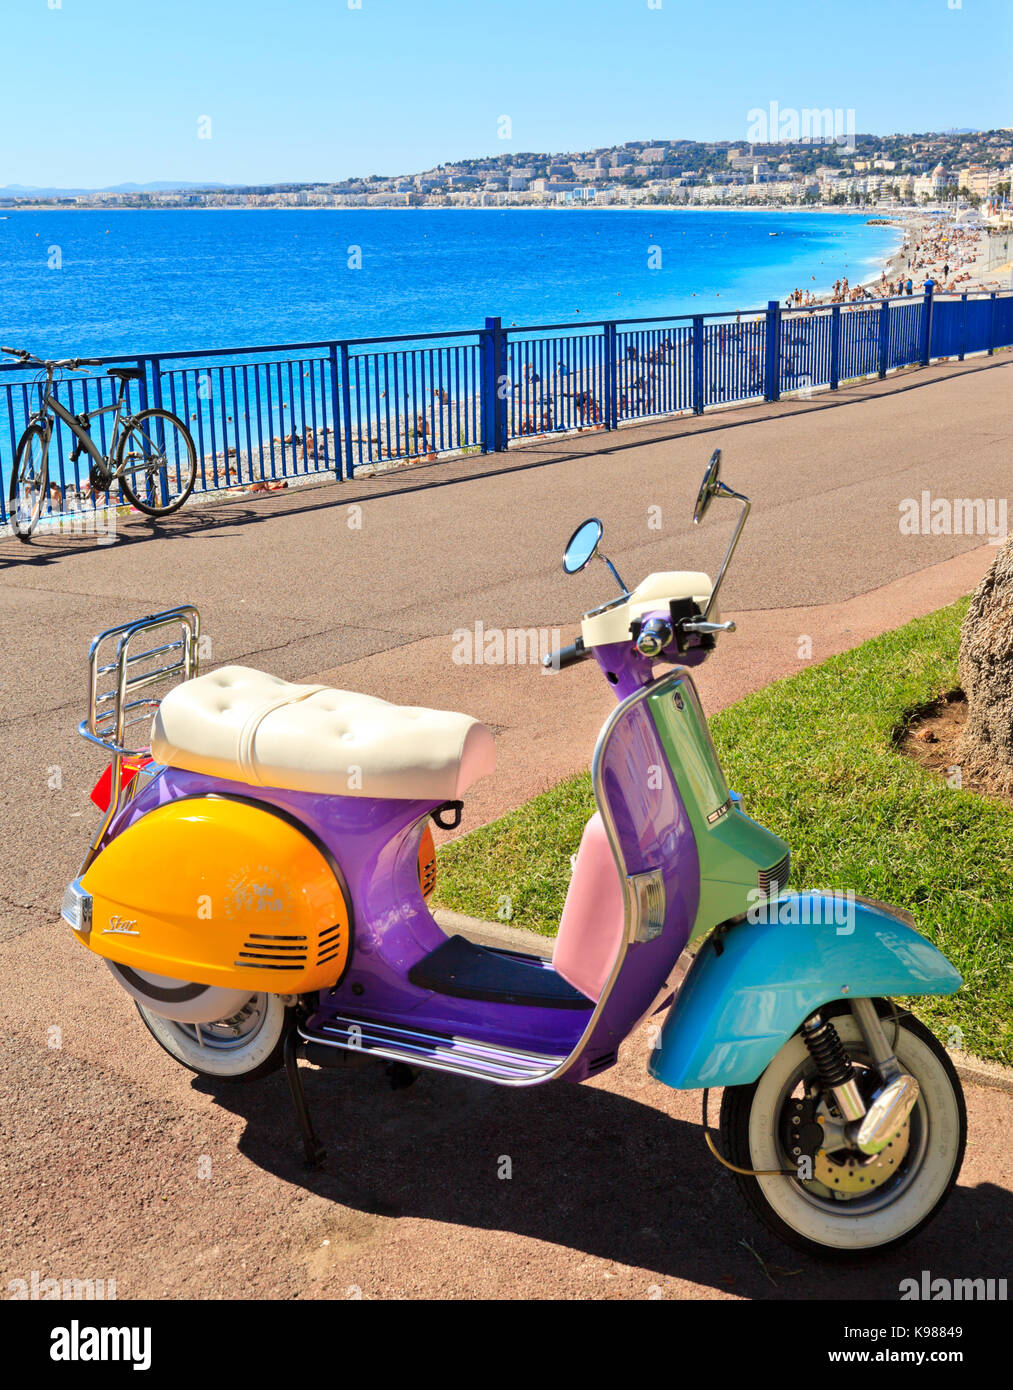 A brightly painted scooter on the promenade in Nice France Stock Photo -  Alamy